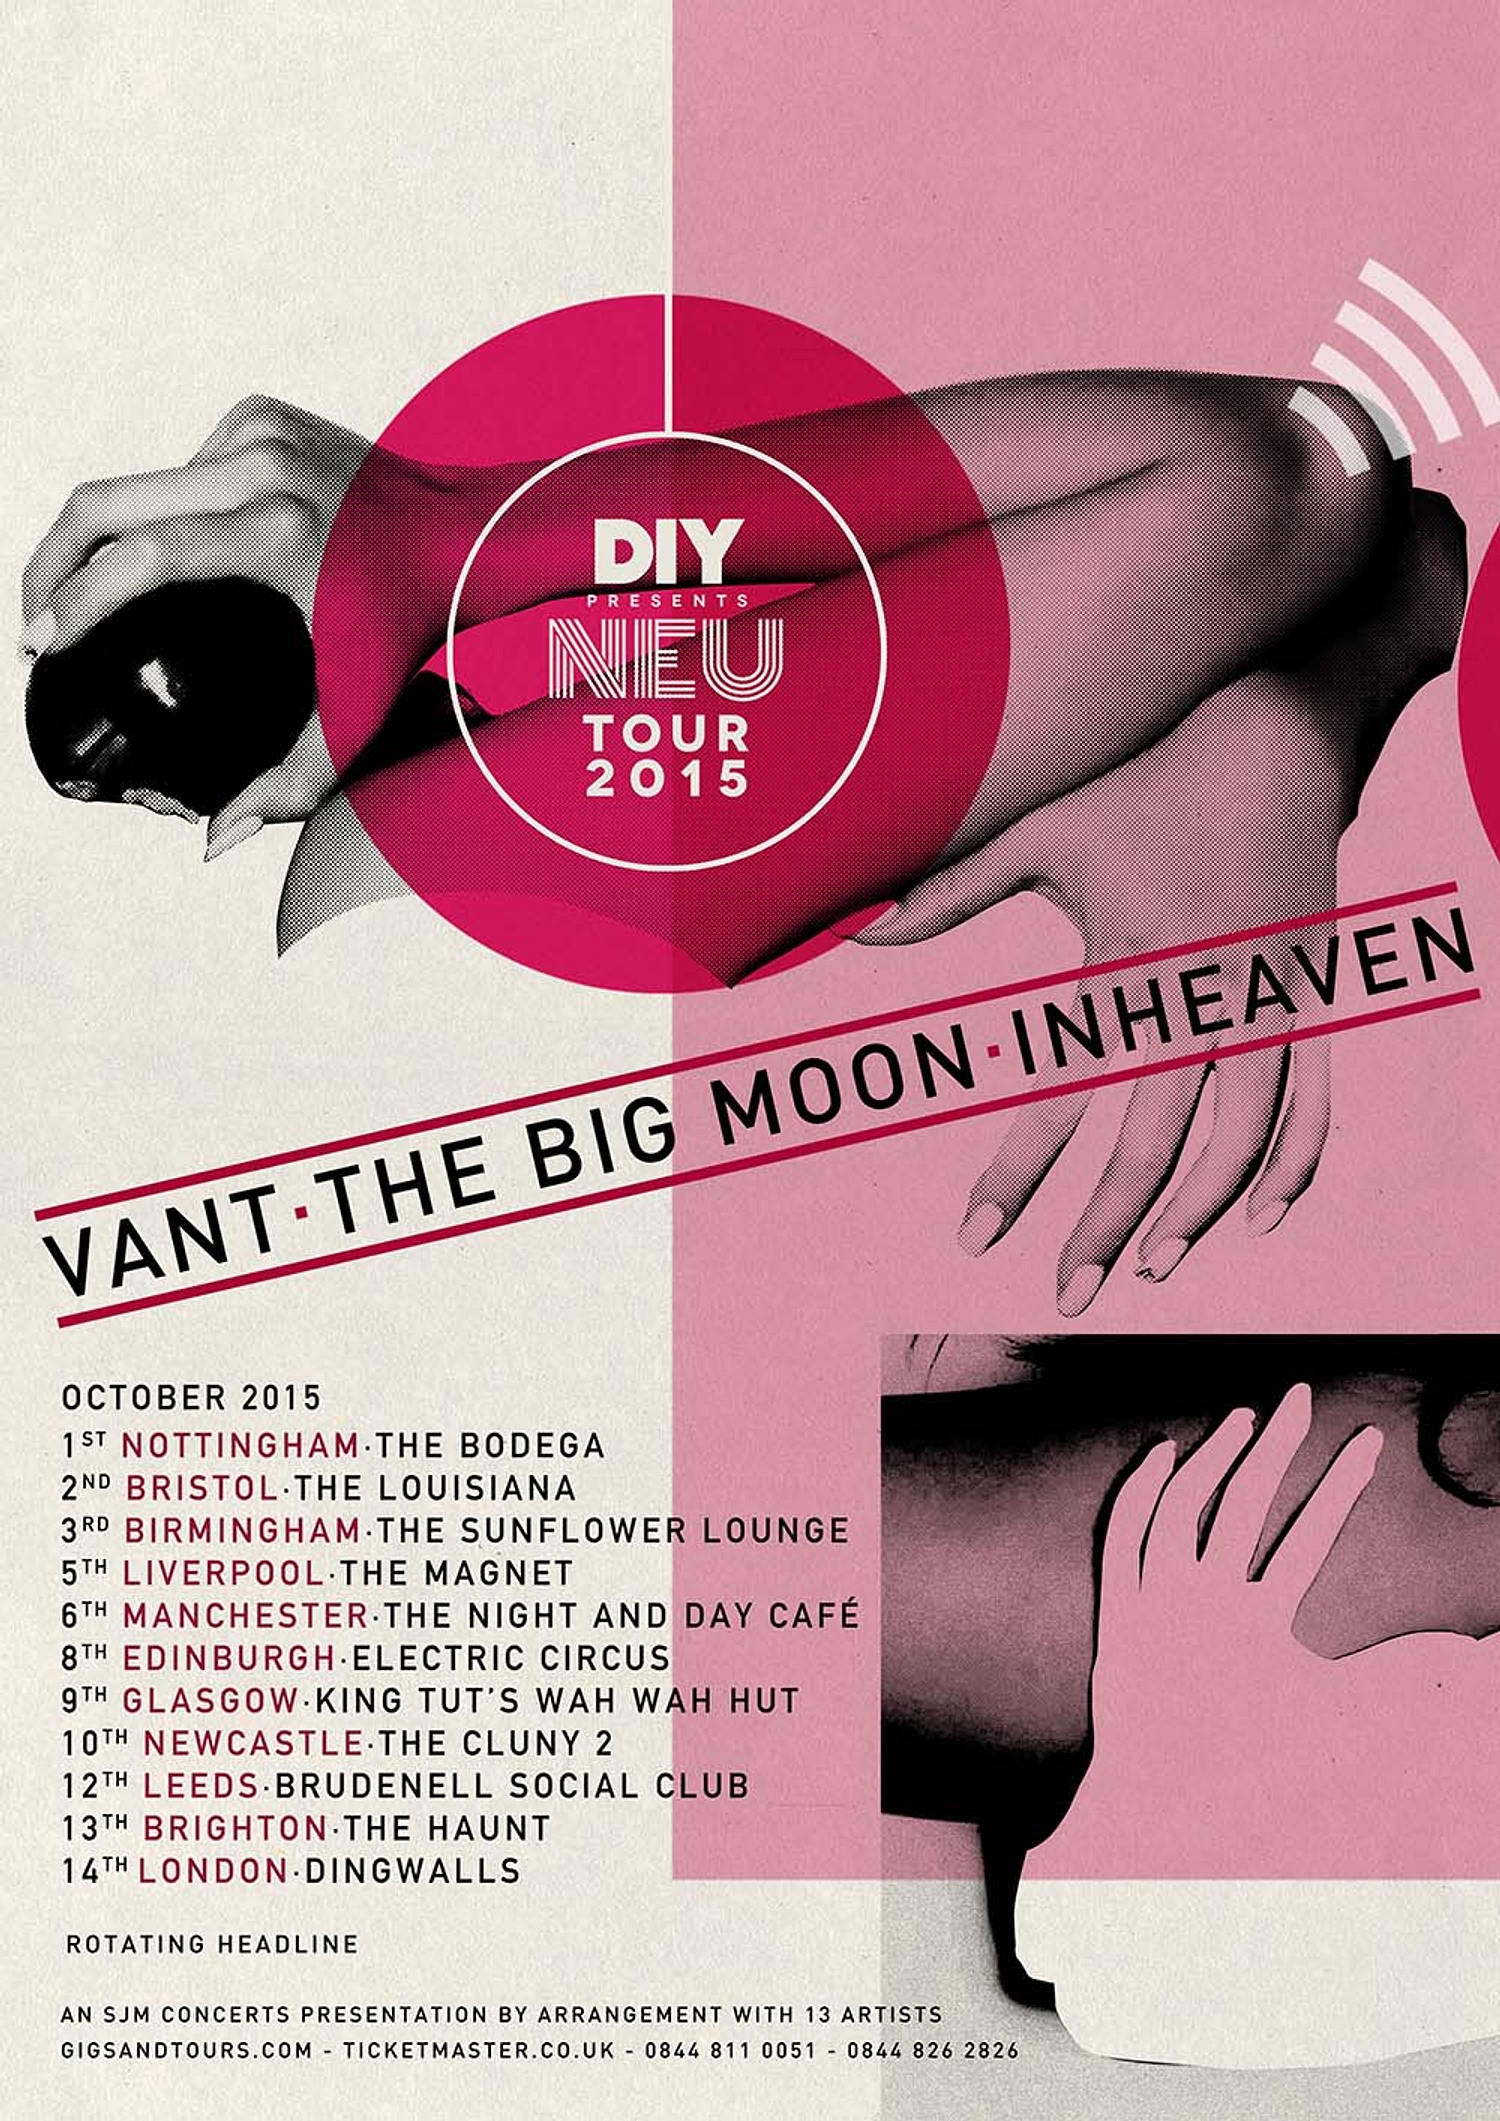 VANT, INHEAVEN and The Big Moon to play DIY Presents the Neu Tour 2015